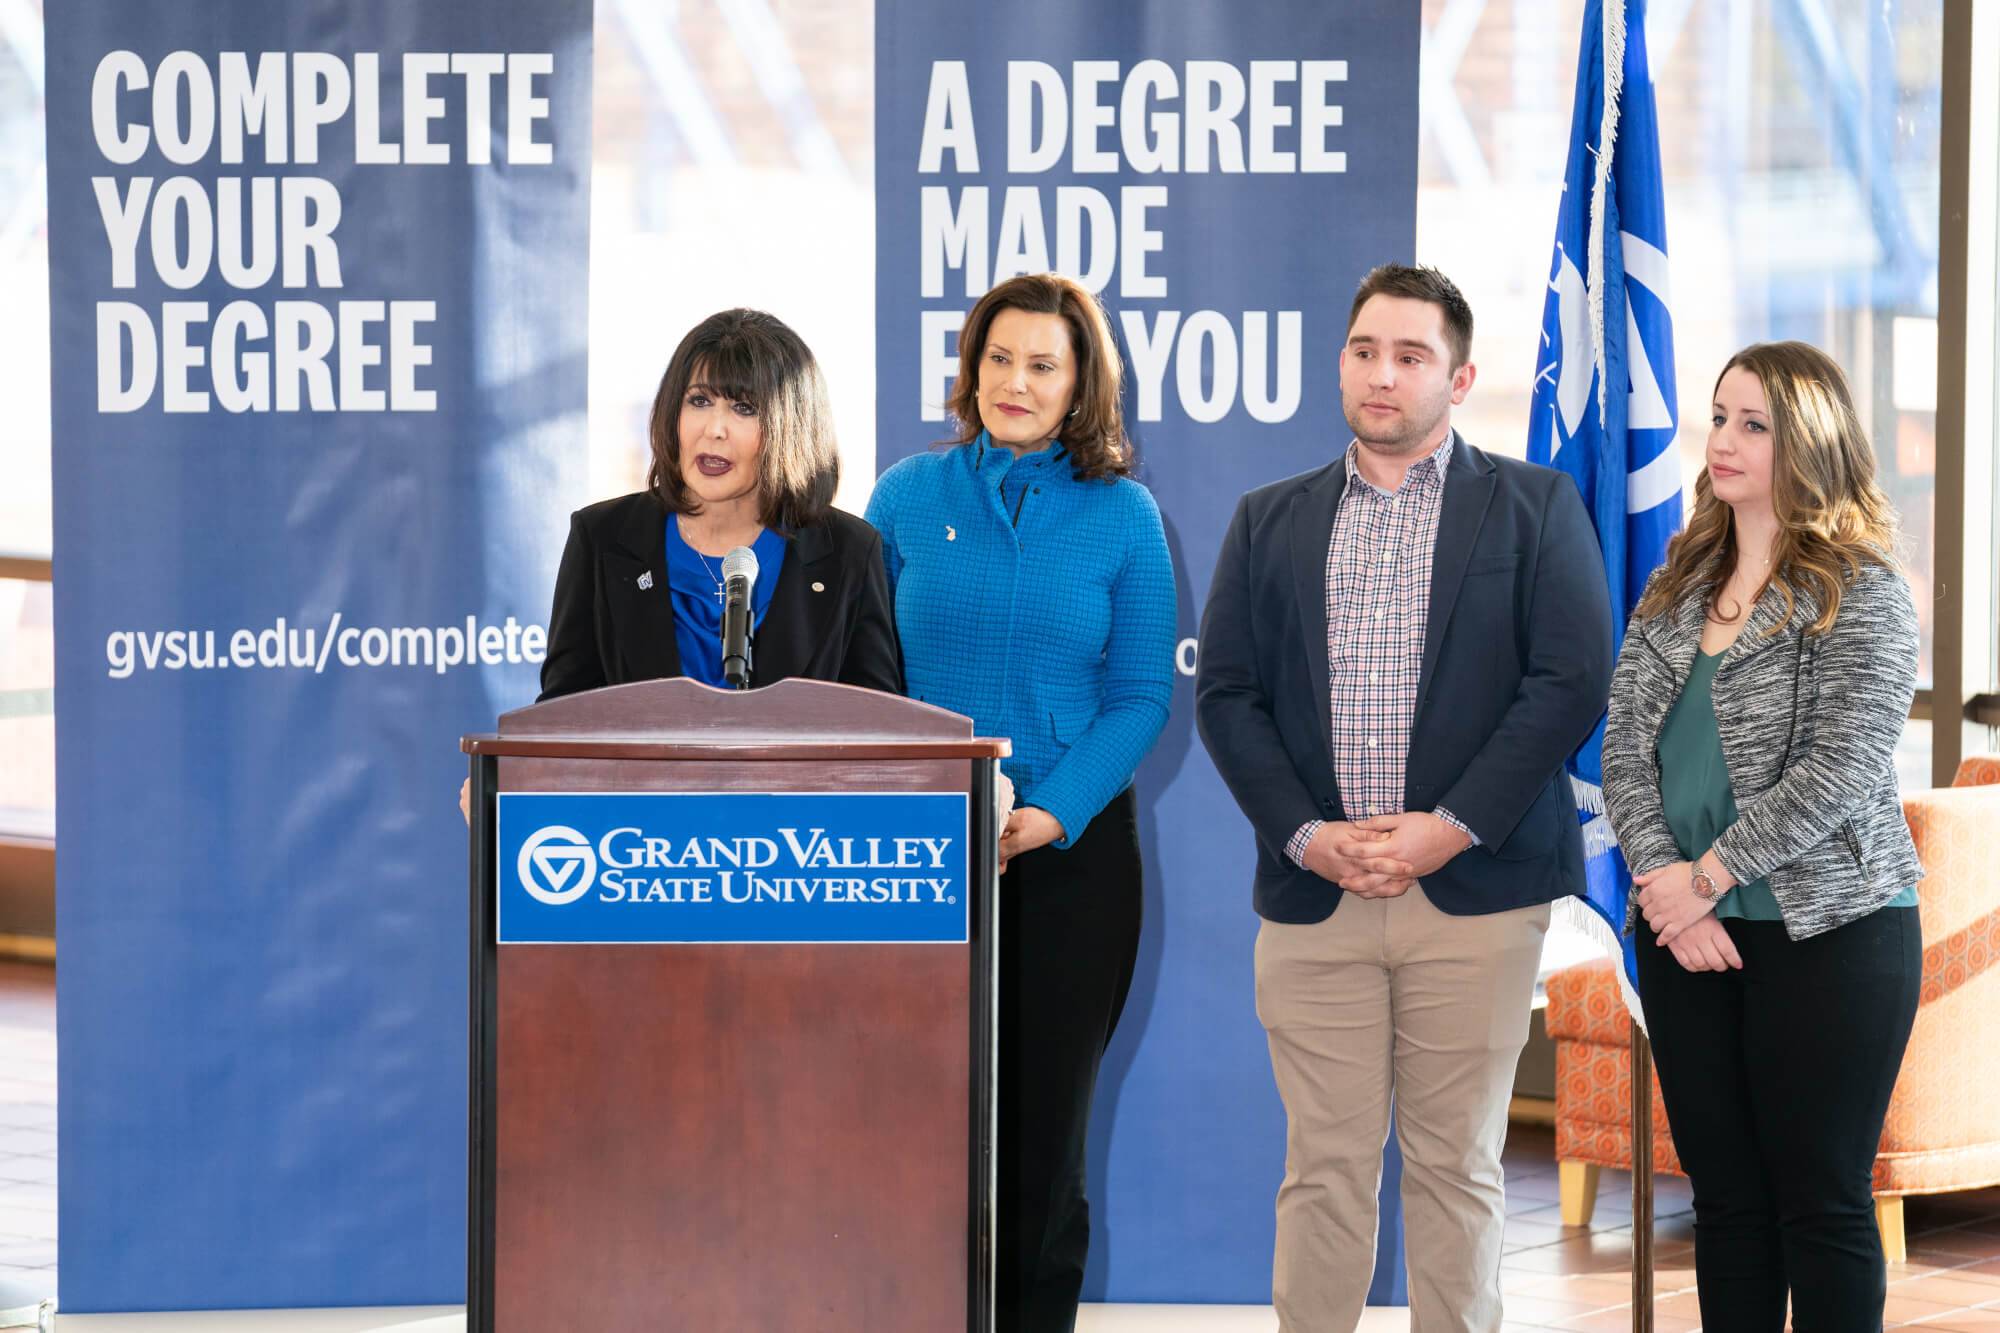 Governor Whitmer joins President Mantella and two students at a podium to announce the LEADS program.